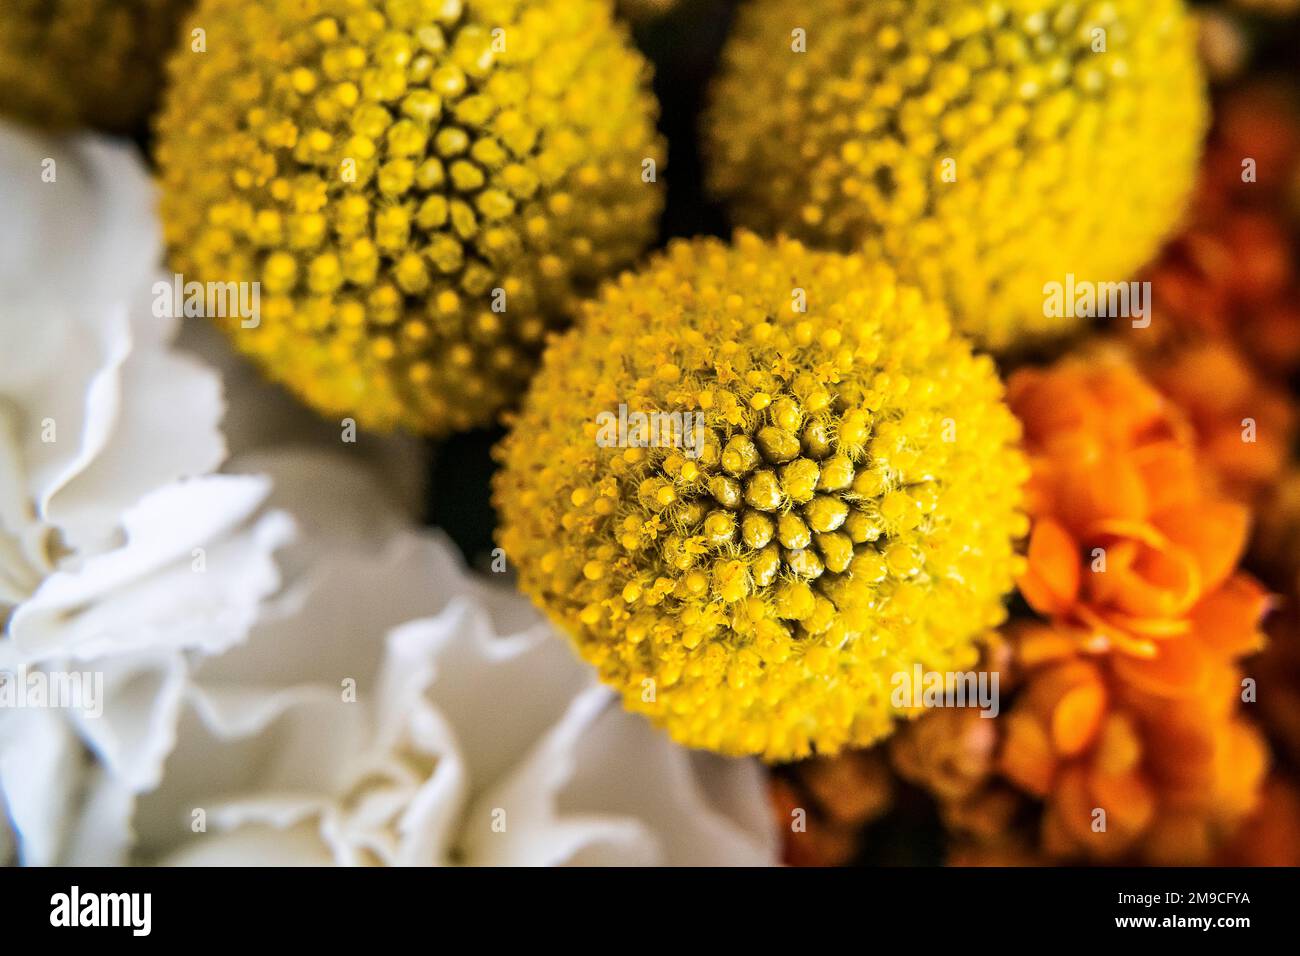 Bright Yellow Craspedia Drumstick Flowers in Warm Bouquet Stock Photo